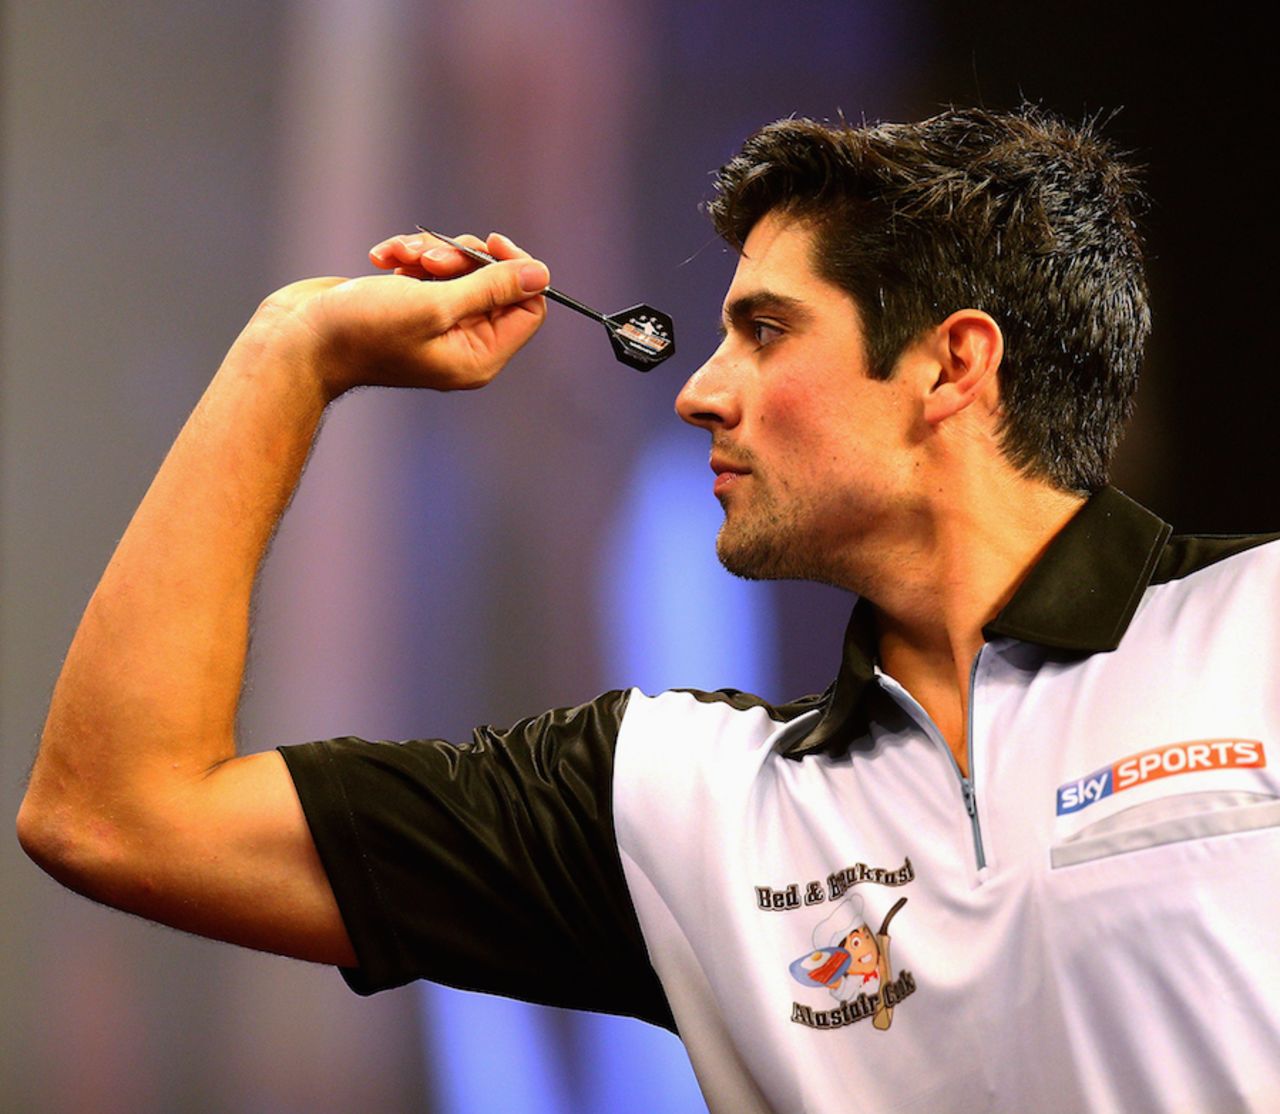 Alastair Cook plays a leg of darts against James Anderson, London, December 22, 2014